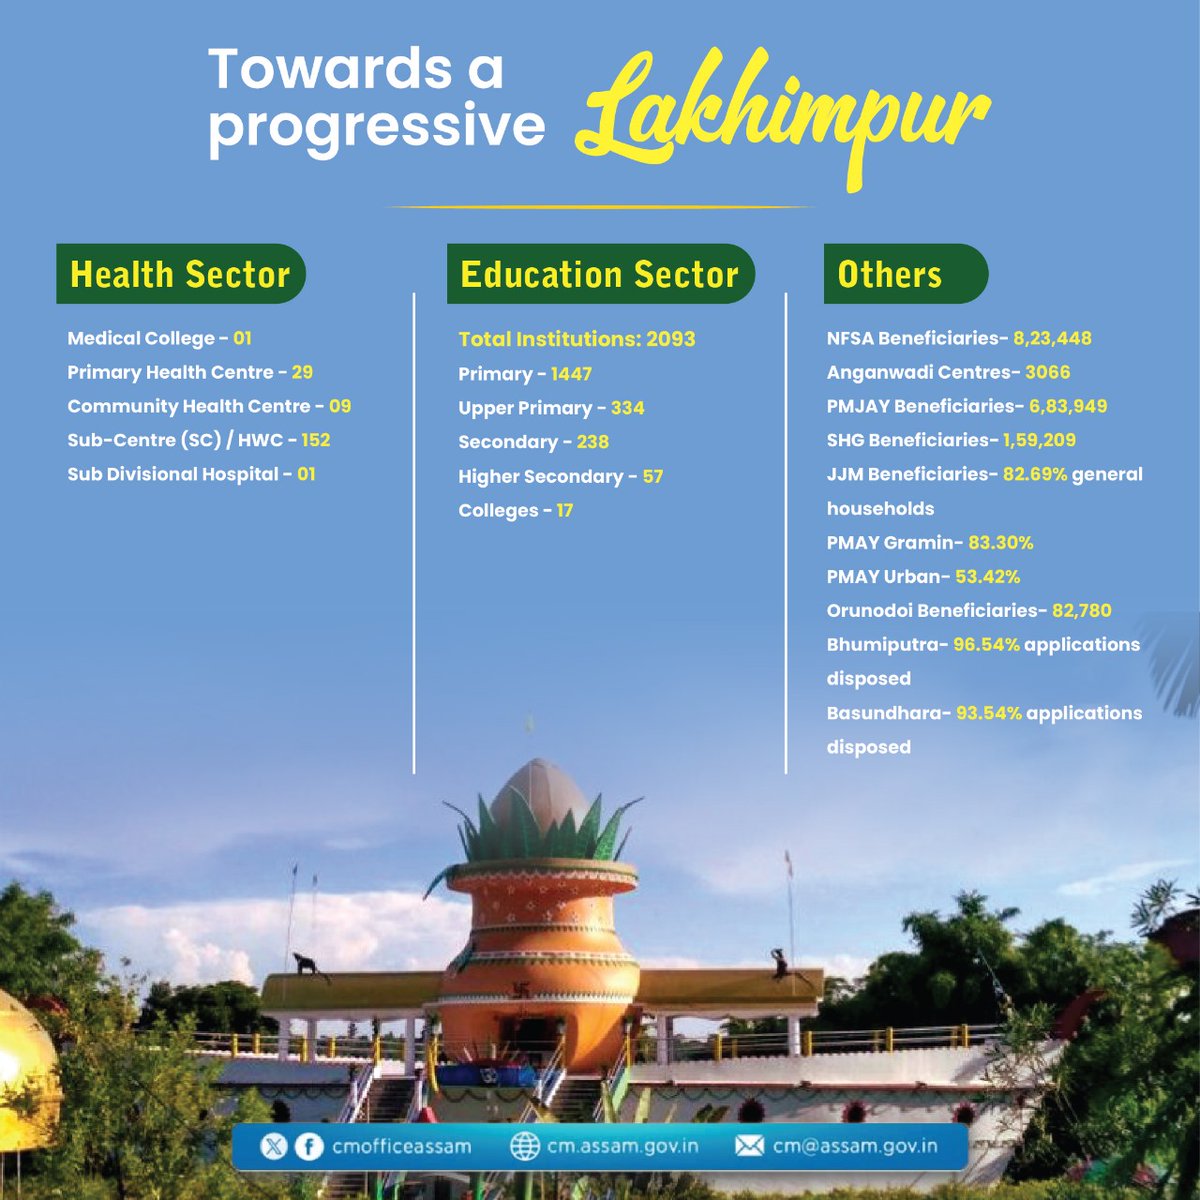 Lakhimpur is making strides in its developmental endeavors under the progressive policies of the Assam Government. Here's a summary of the district's ongoing progress.